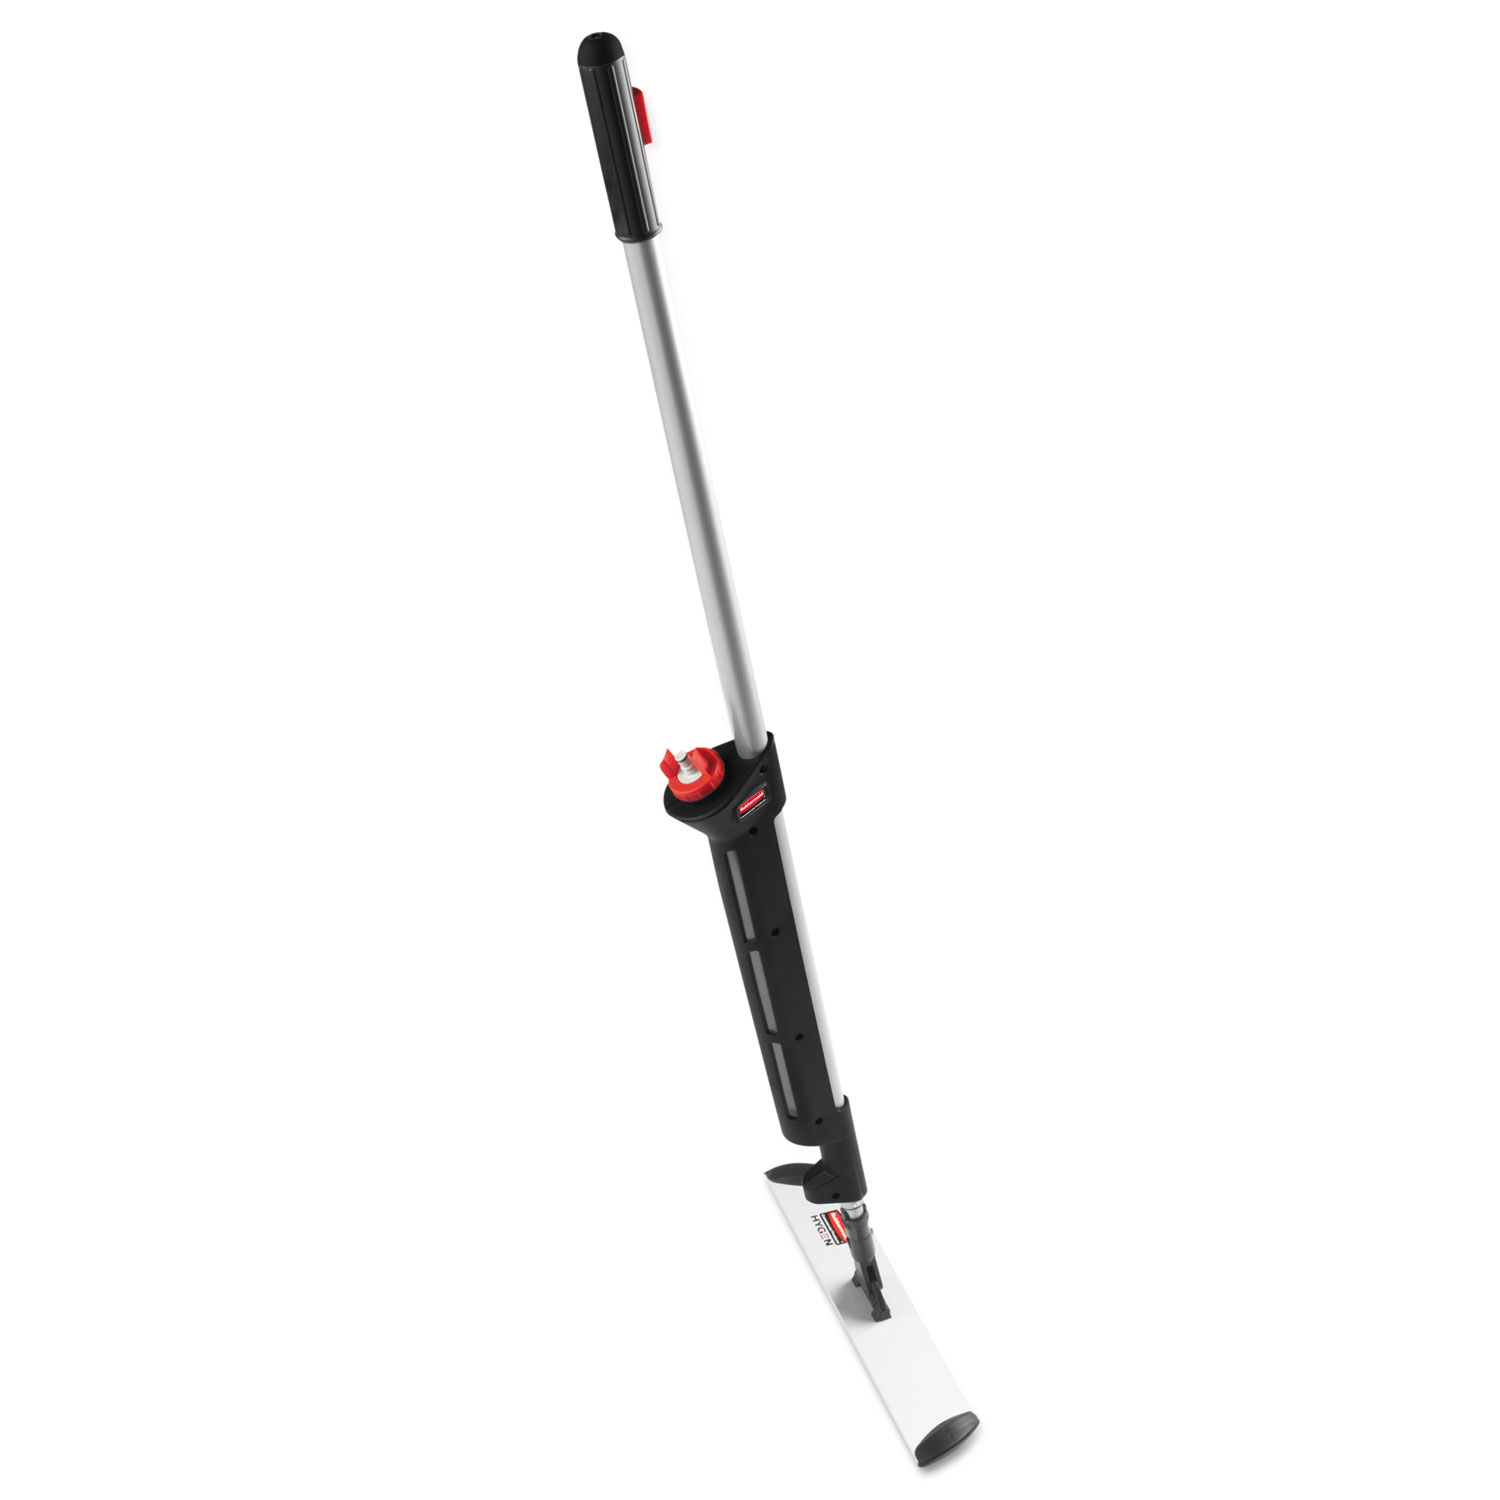  Rubbermaid Commercial 1863884 Pulse Executive Spray Mop System, Black/Silver Handle, 55.4 (RCP1863884) 